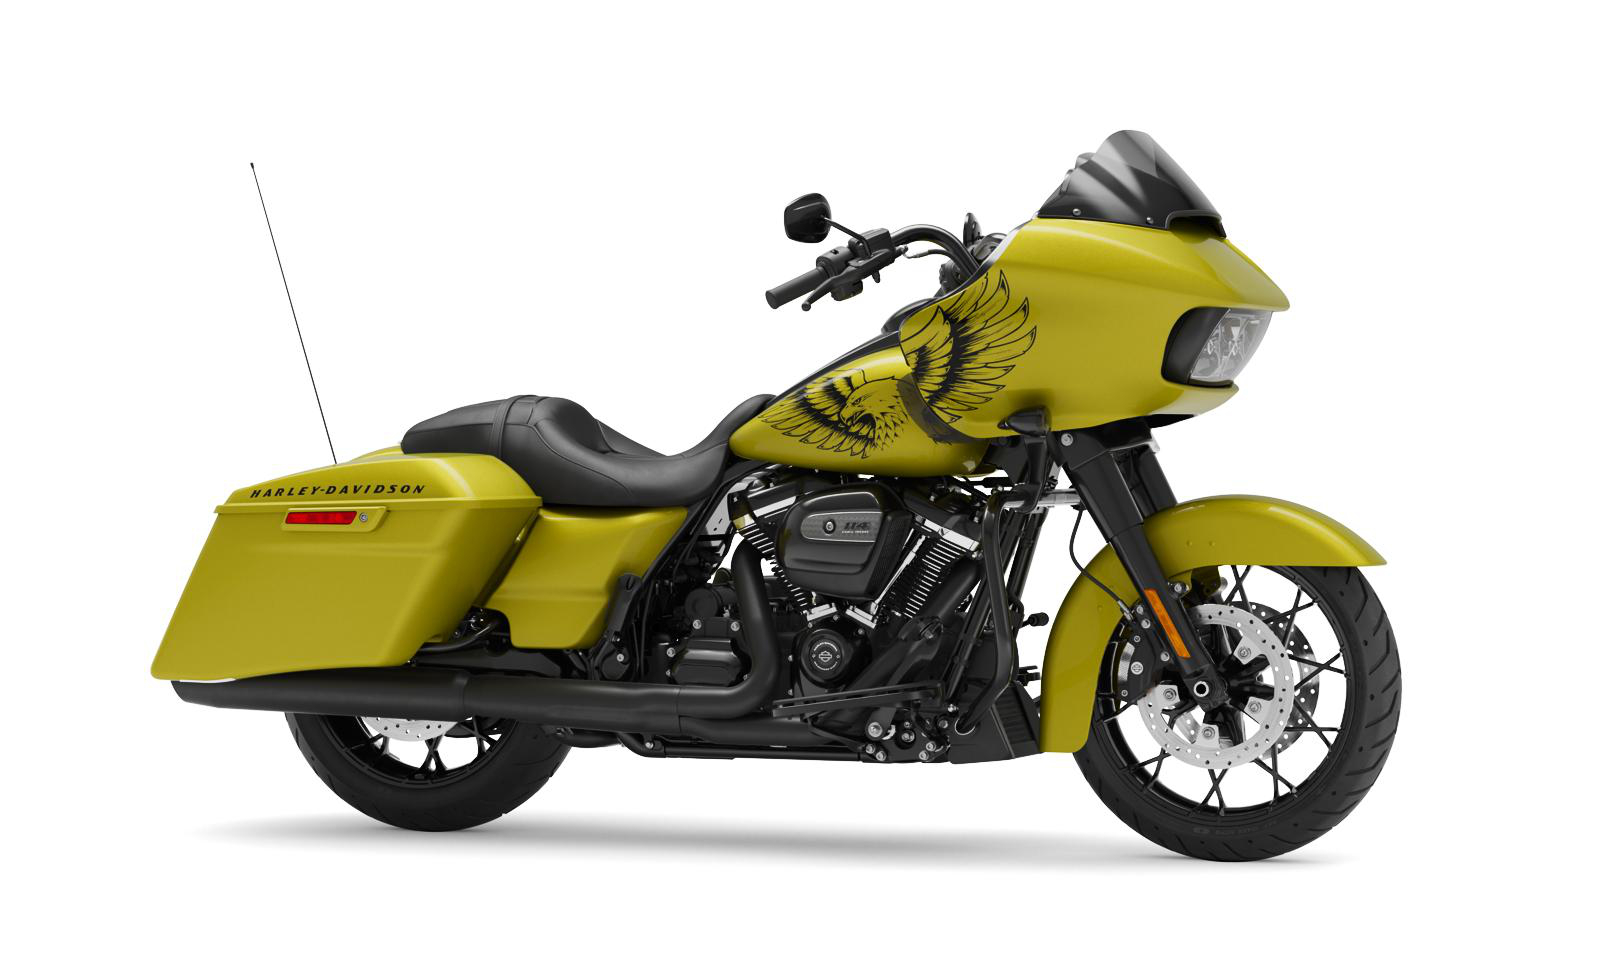 2020 road glide special price